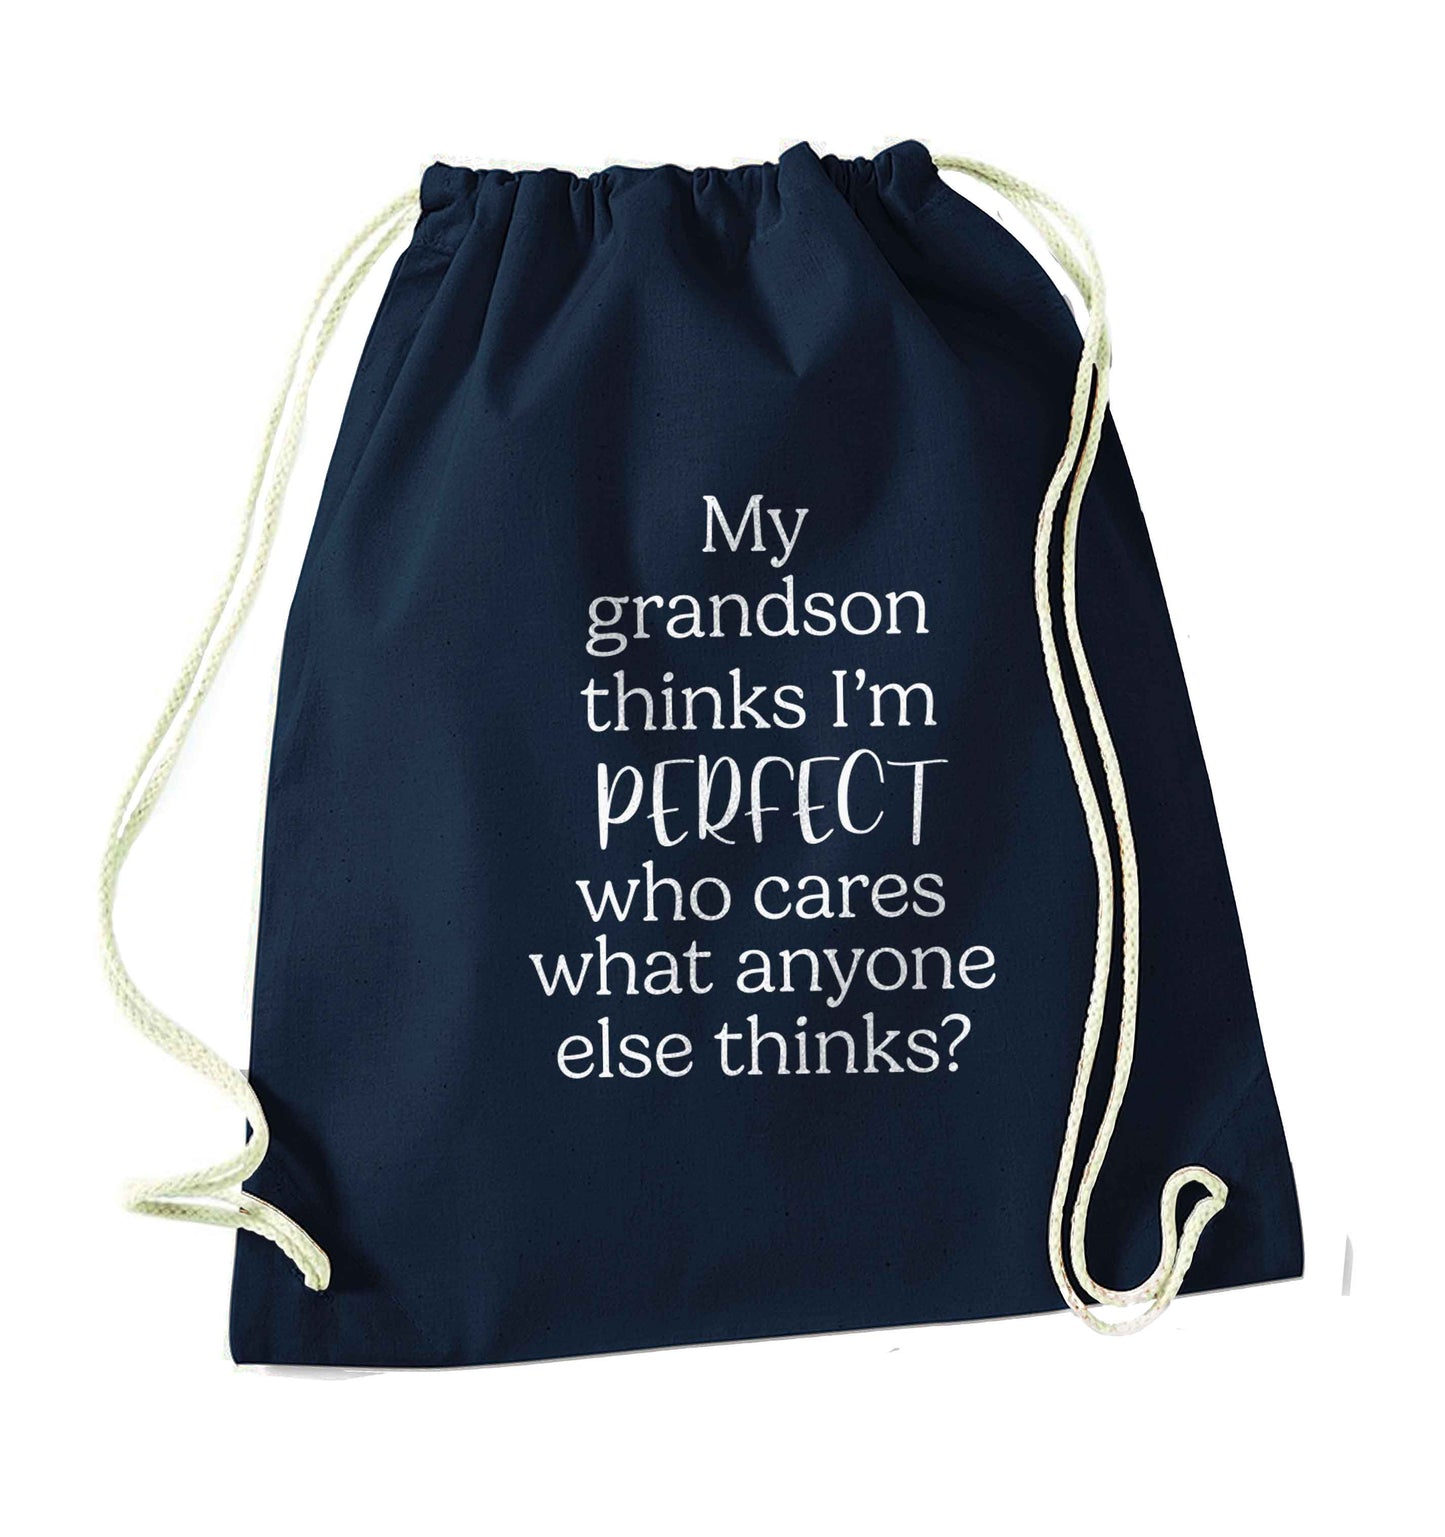 My Grandson thinks I'm perfect who cares what anyone else thinks? navy drawstring bag